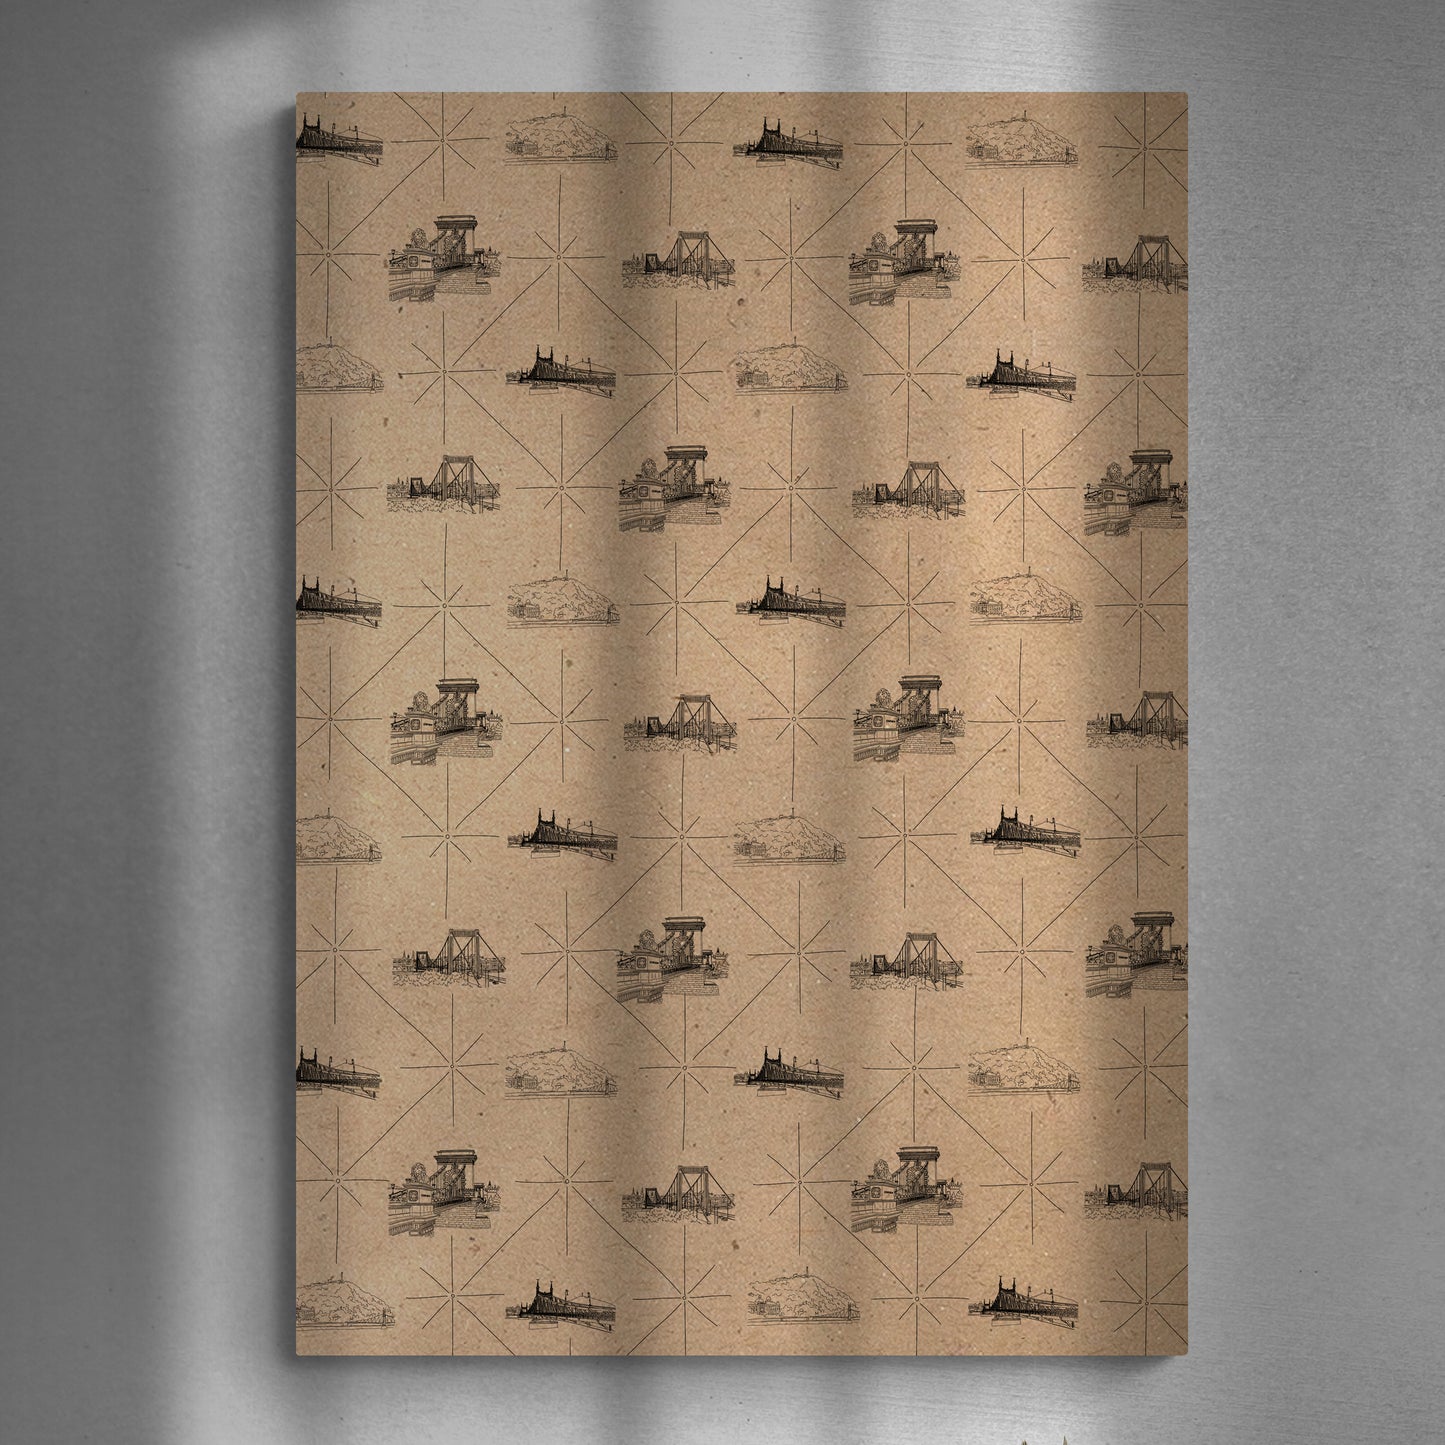 Budapest wrapping paper set